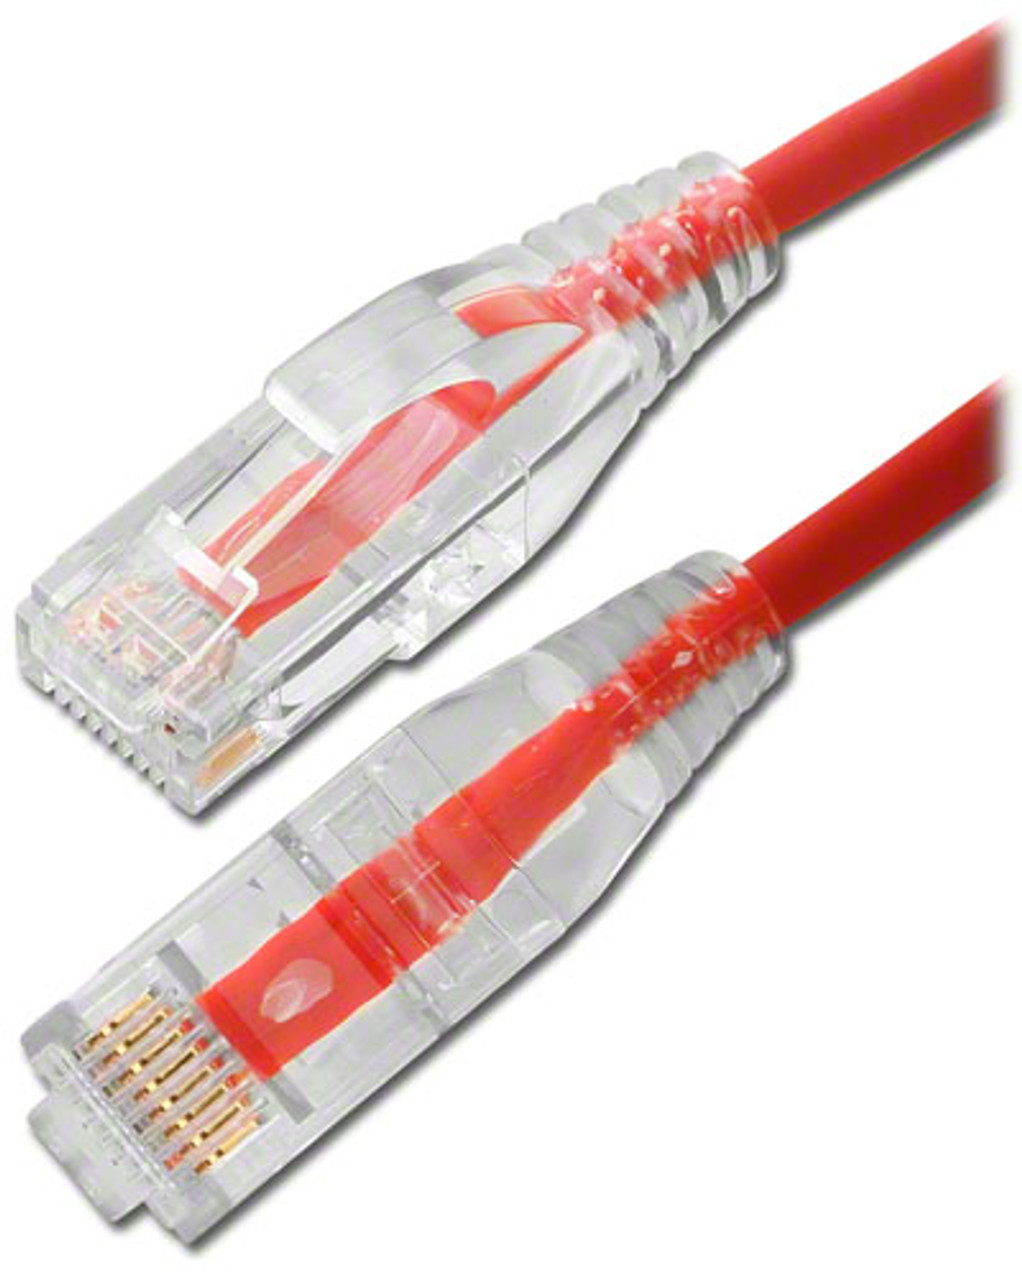 6-FT- Mini Cat 6 Thin Patch Cable - Red Jacket - DC-56NP-6'RDTB - TMB